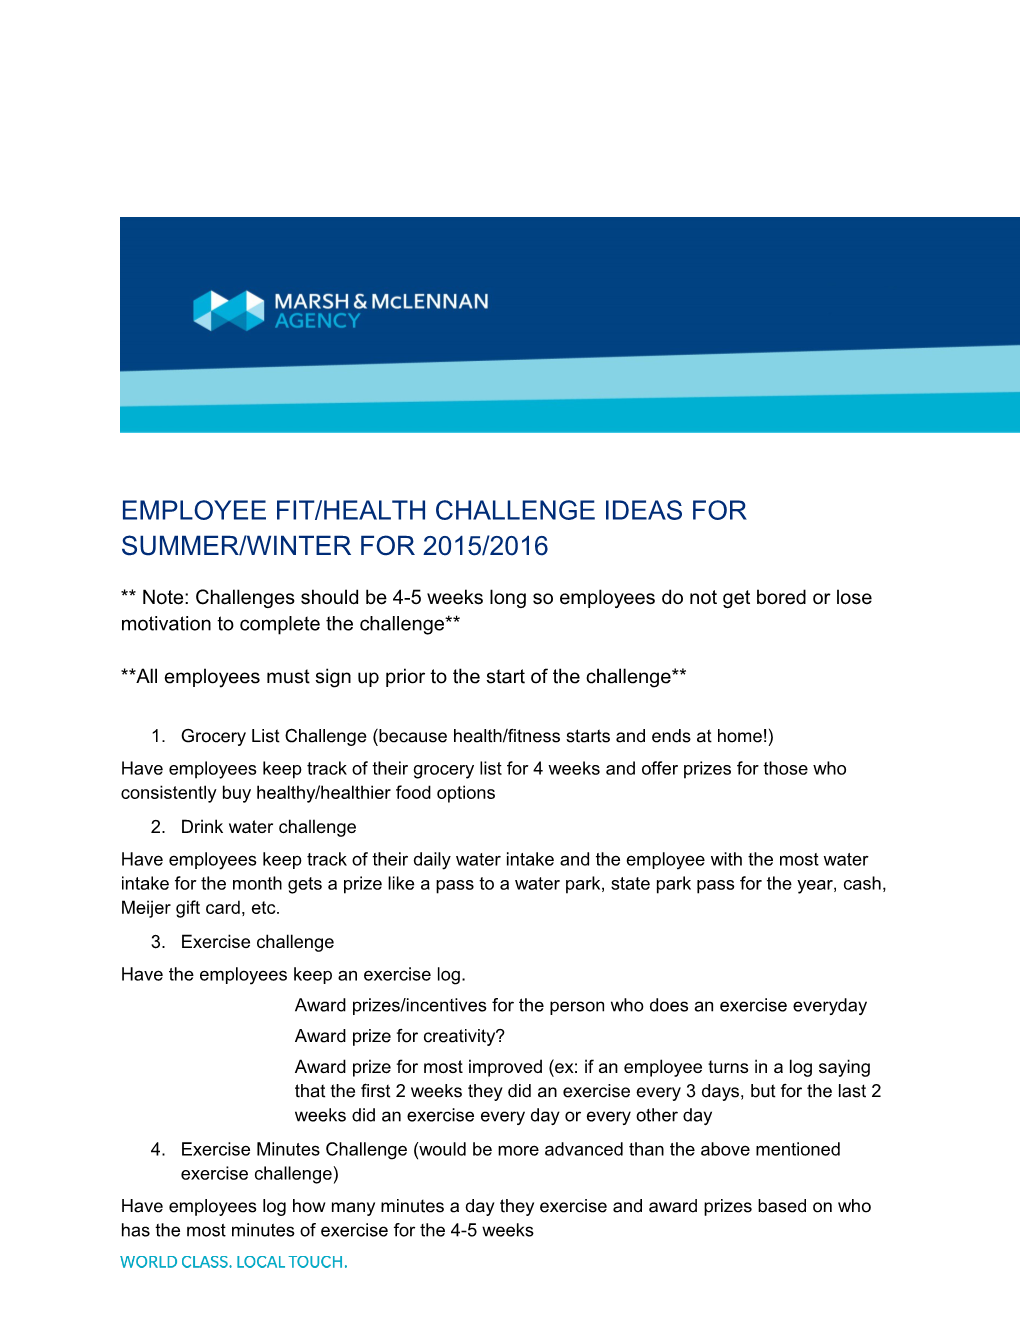 Employee Fit/Health Challenge Ideas for Summer/Winter for 2015/2016